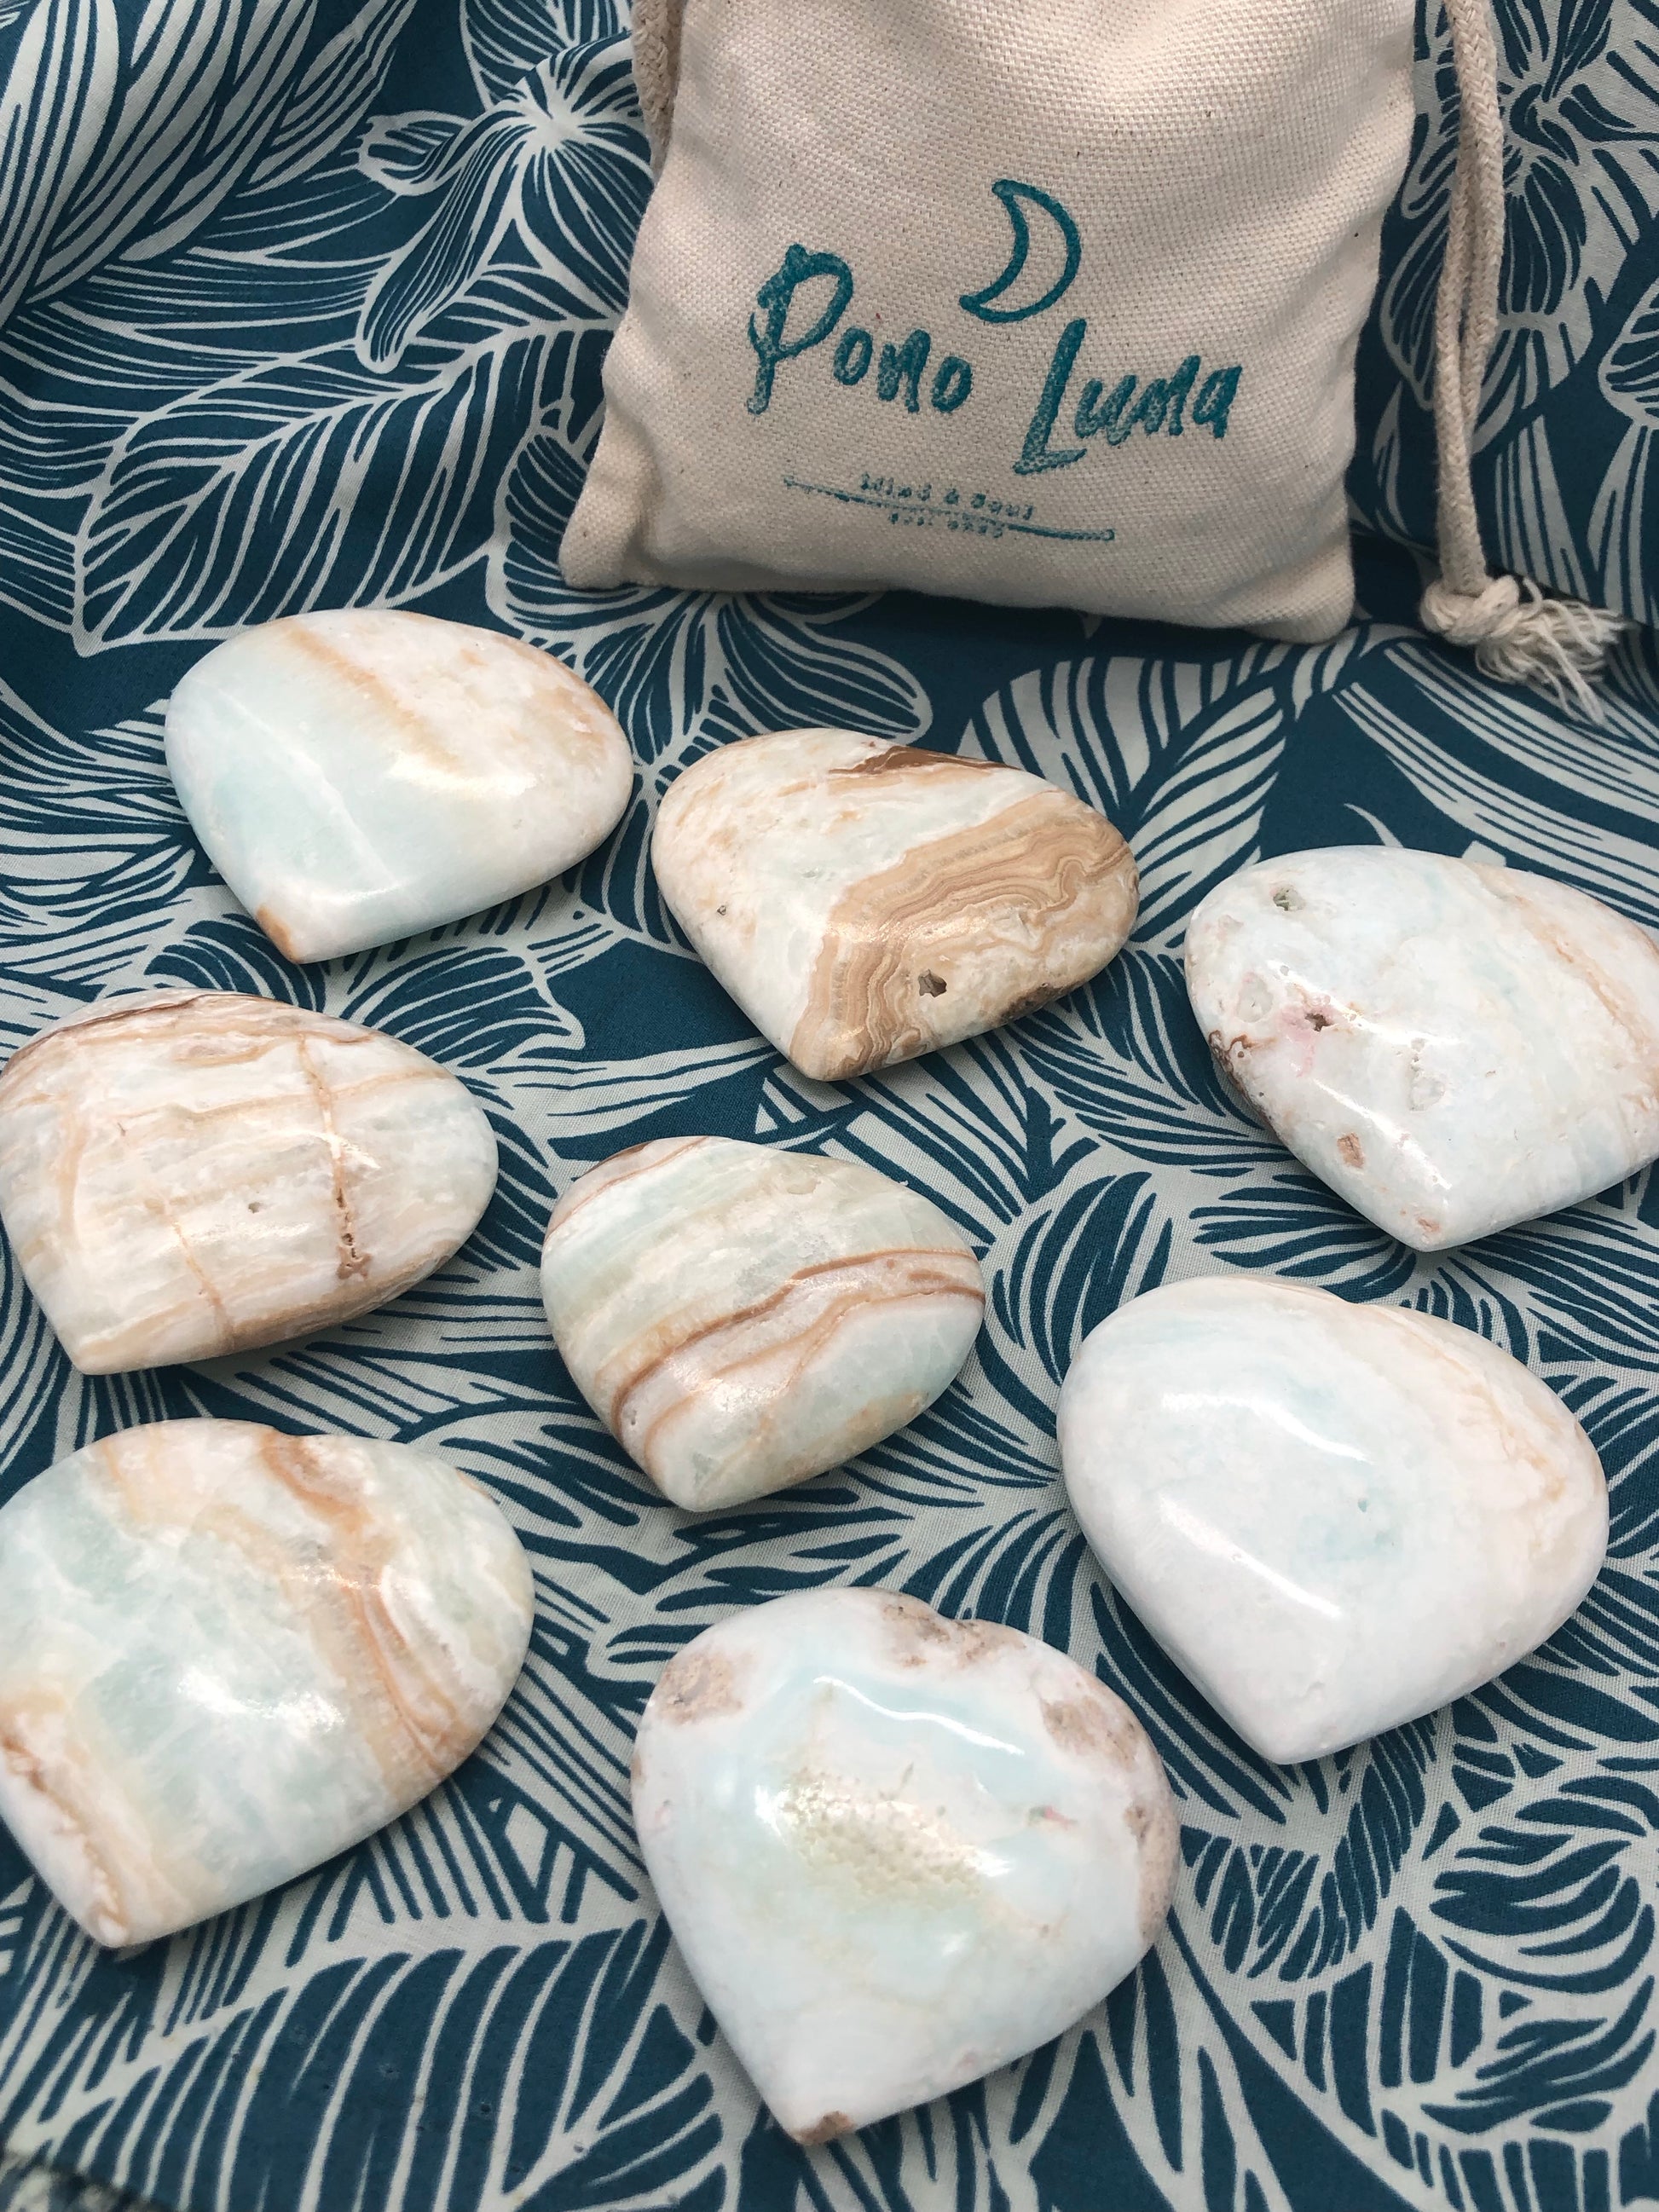 Pono Luna's beautiful hand carved and polished heart shaped Caribbean Calcite palm stones.